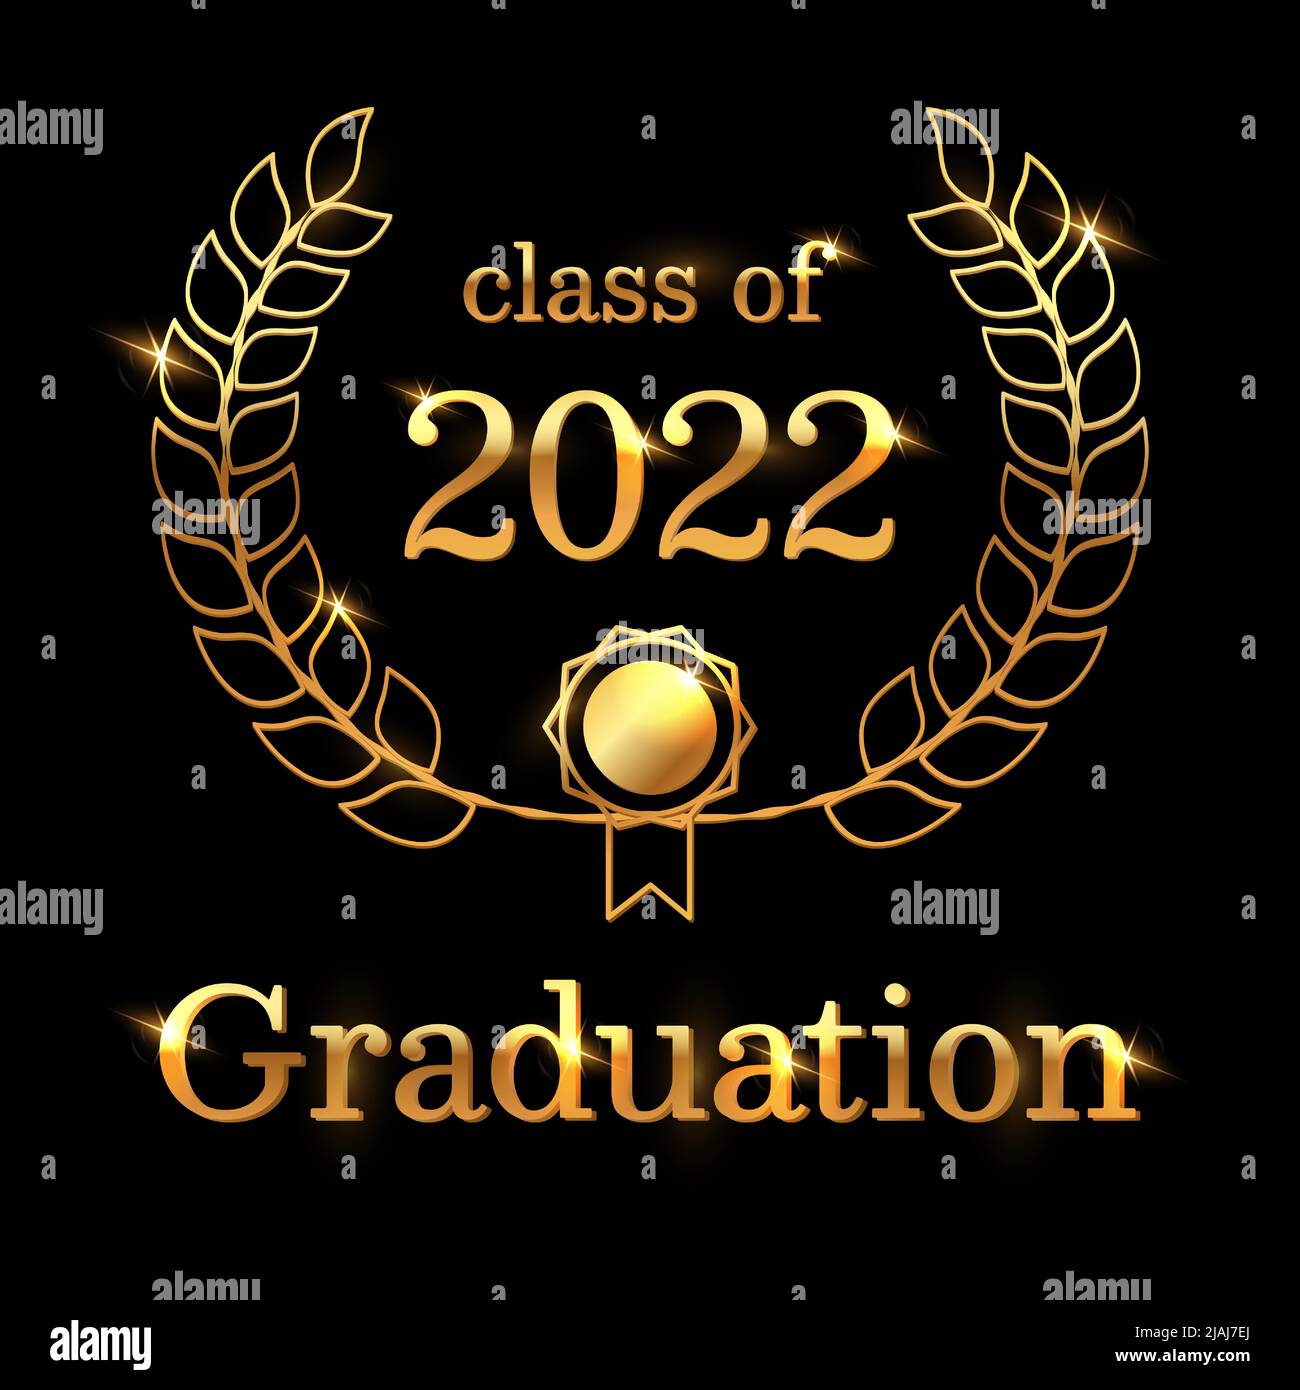 Elegant class of 2022 graduation poster design. Black and gold. Shiny vector template for graduation party invitation, graduation or greeting card. Stock Vector